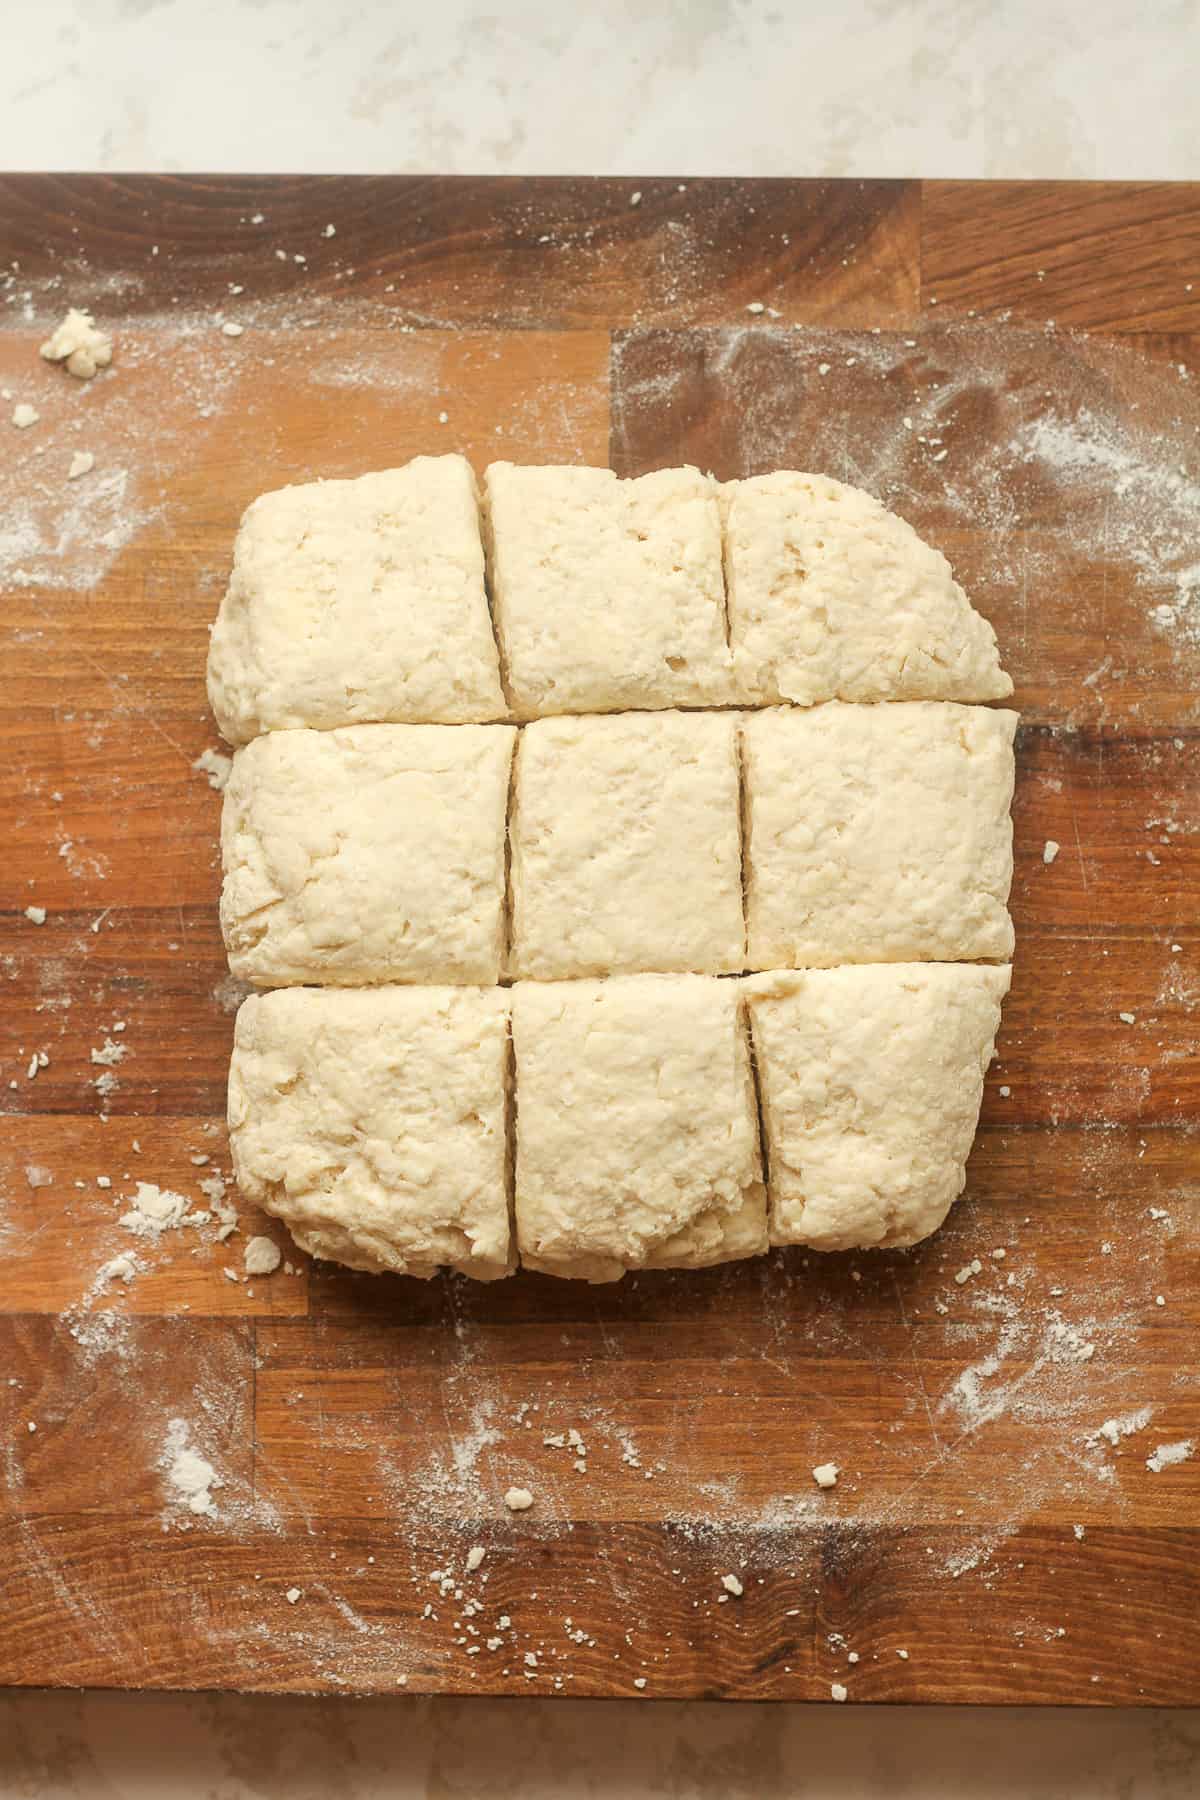 A board with some cut buttermilk biscuits.